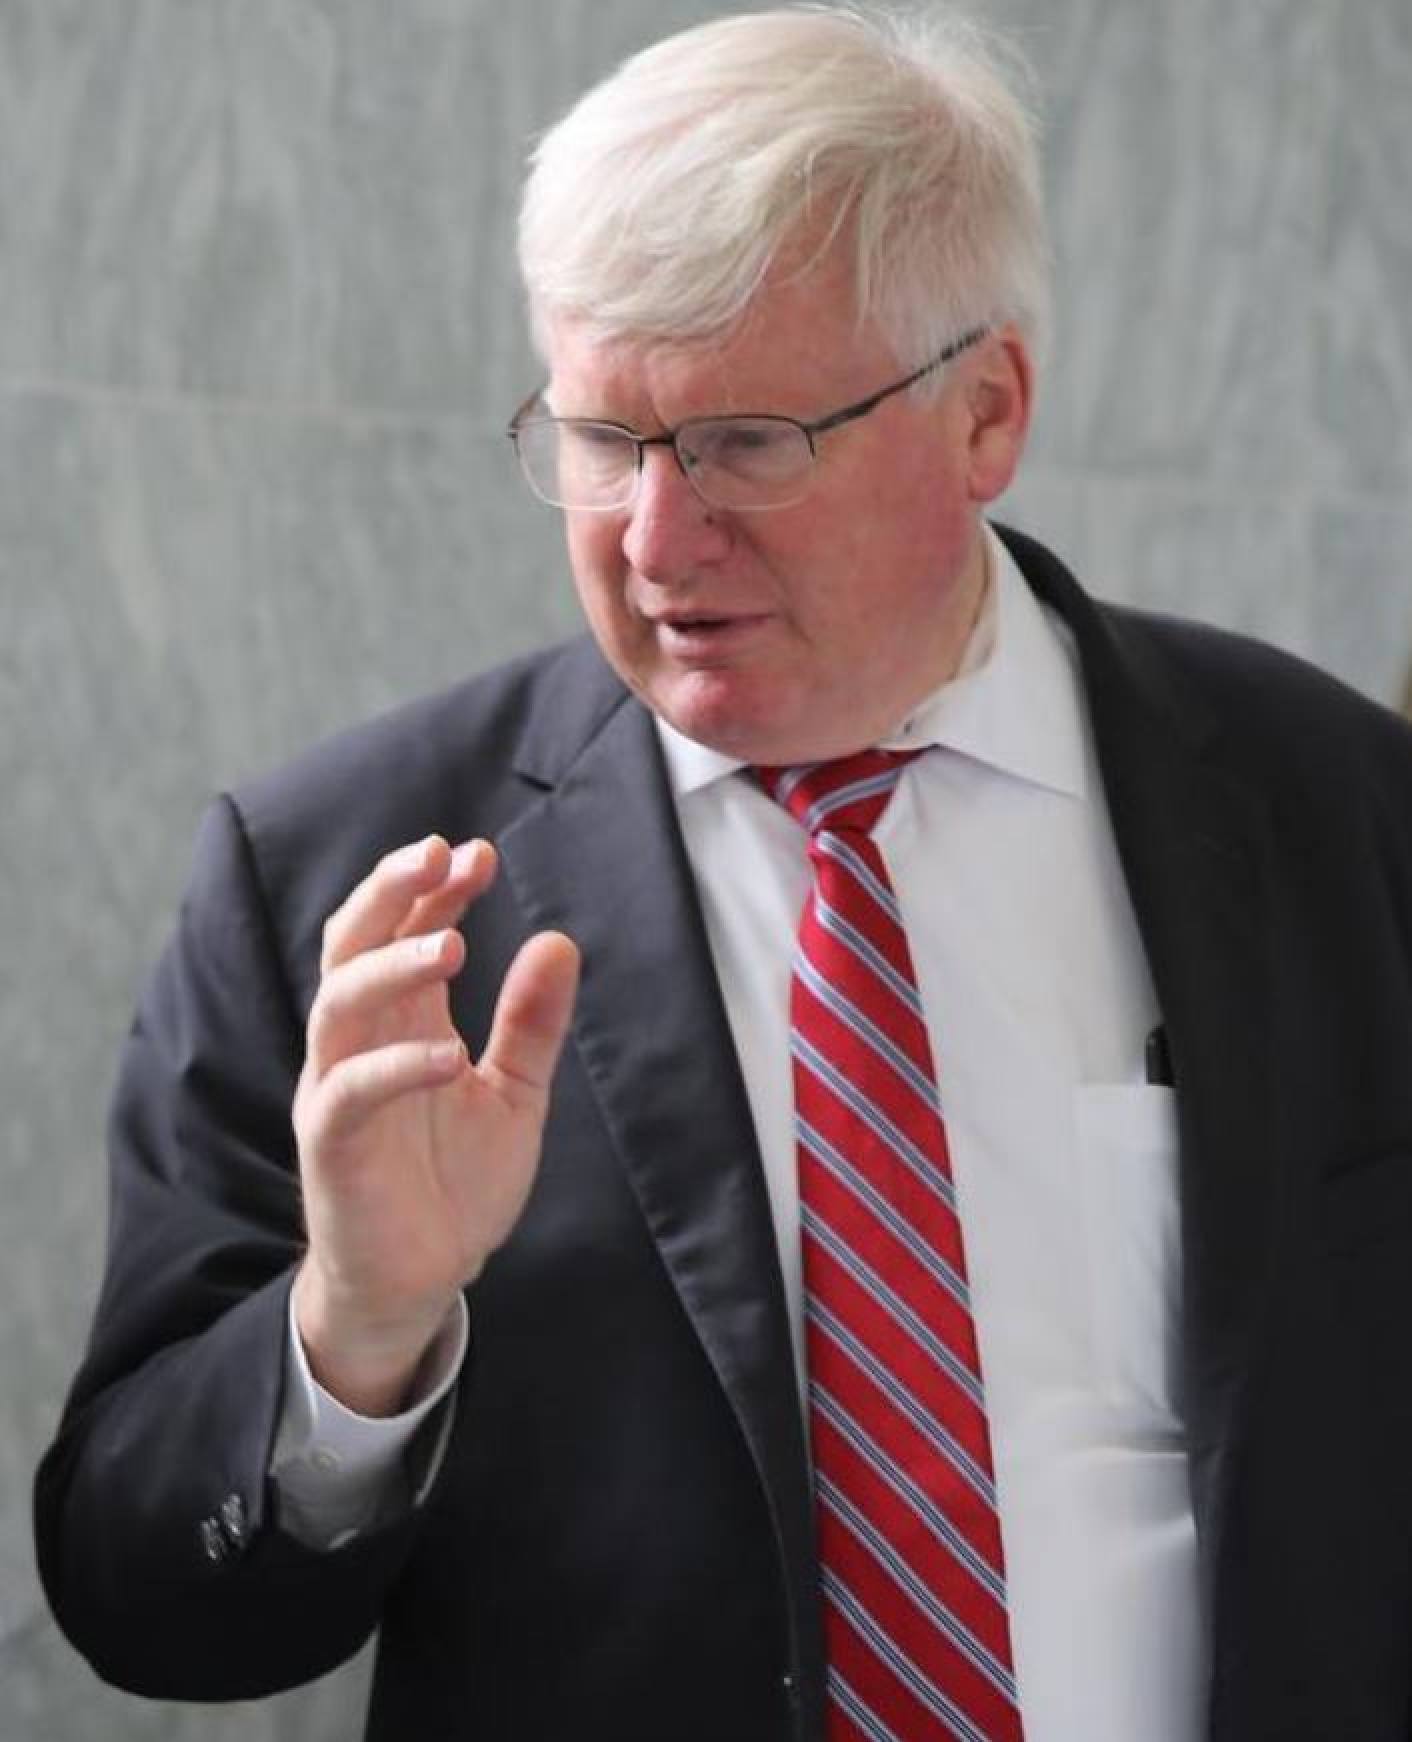 US Representative Glenn Grothman, chairman of the House Subcommittee on National Security, the Border and Foreign Affairs. Photo: Instagram